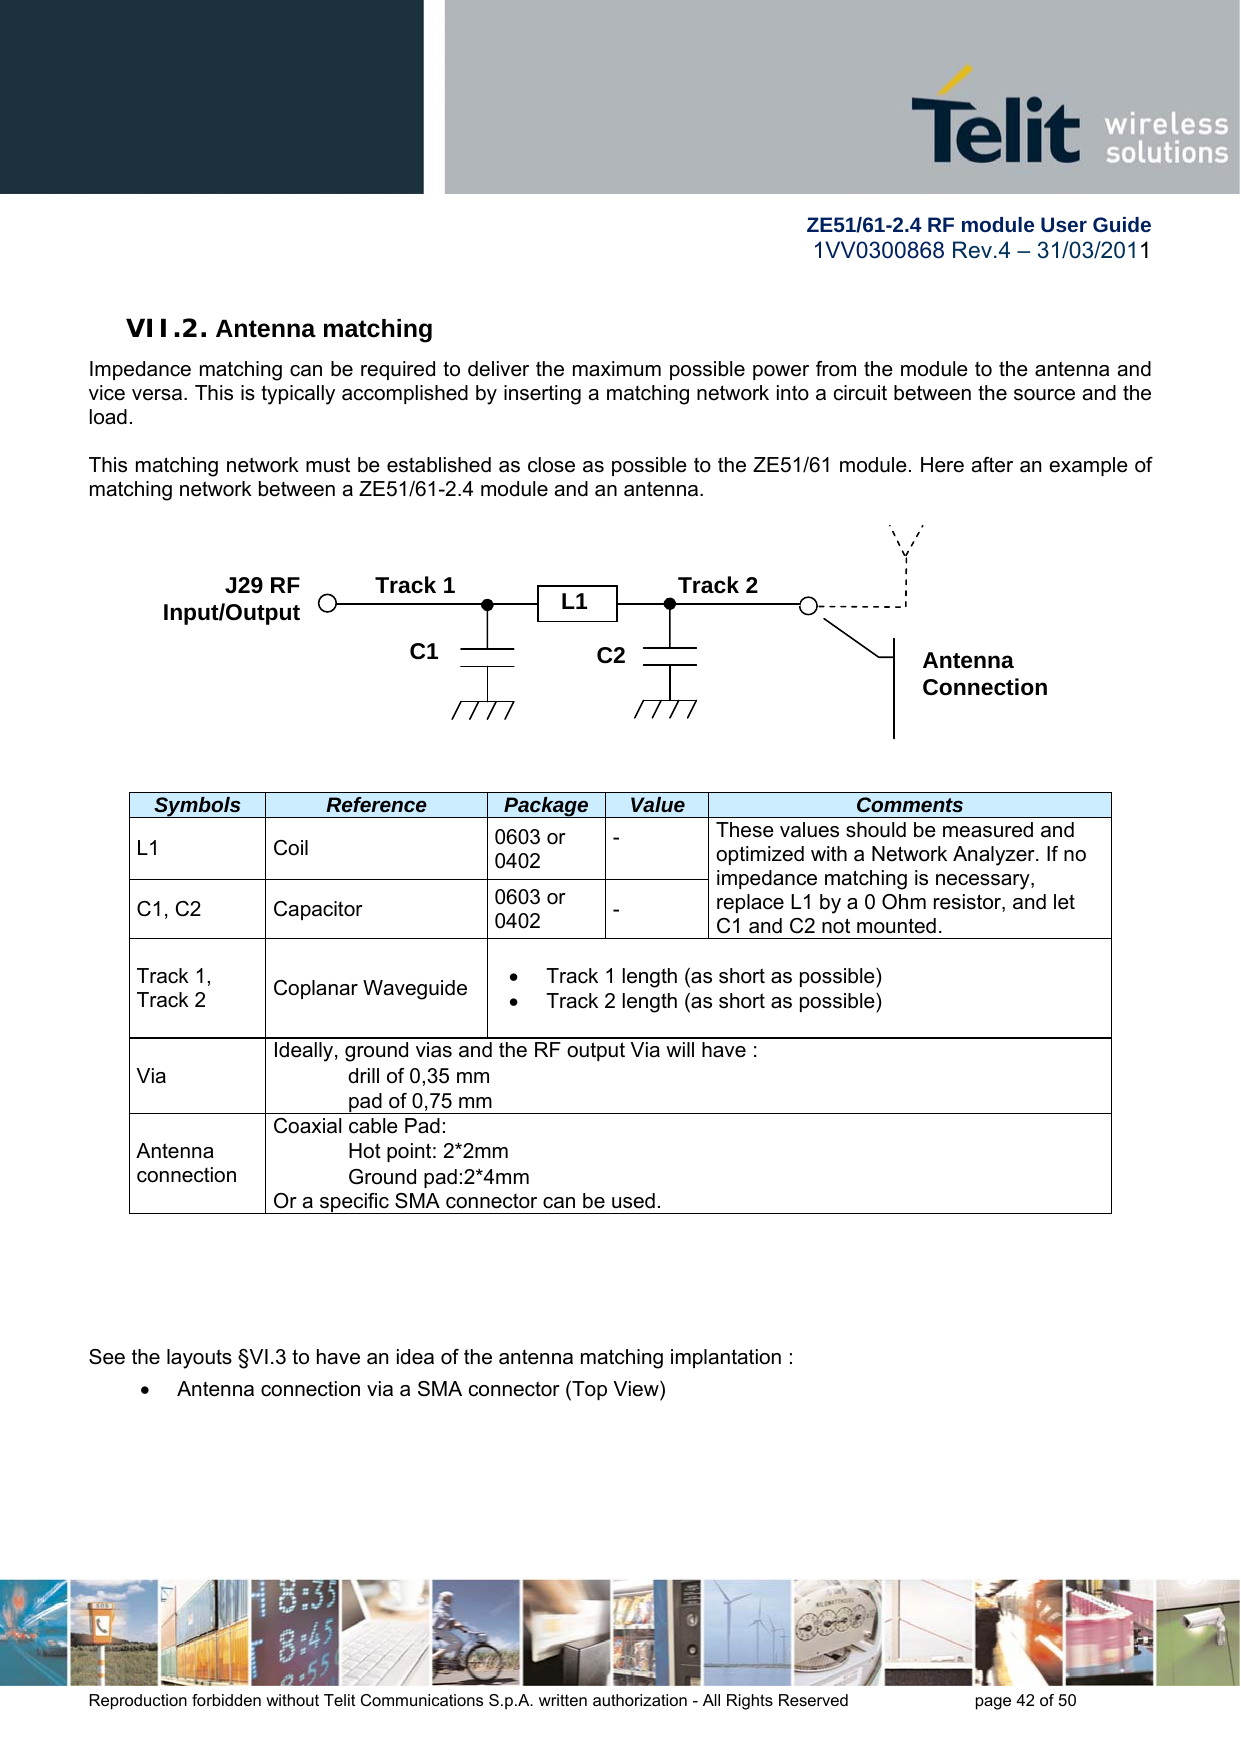         ZE51/61-2.4 RF module User Guide 1VV0300868 Rev.4 – 31/03/2011 Reproduction forbidden without Telit Communications S.p.A. written authorization - All Rights Reserved    page 42 of 50  VII.2. Antenna matching Impedance matching can be required to deliver the maximum possible power from the module to the antenna and vice versa. This is typically accomplished by inserting a matching network into a circuit between the source and the load.  This matching network must be established as close as possible to the ZE51/61 module. Here after an example of matching network between a ZE51/61-2.4 module and an antenna.     Symbols  Reference  Package  Value  Comments L1   Coil  0603 or 0402  -  These values should be measured and optimized with a Network Analyzer. If no impedance matching is necessary, replace L1 by a 0 Ohm resistor, and let C1 and C2 not mounted. C1, C2  Capacitor  0603 or 0402  - Track 1, Track 2  Coplanar Waveguide    Track 1 length (as short as possible)   Track 2 length (as short as possible)  Via Ideally, ground vias and the RF output Via will have : drill of 0,35 mm pad of 0,75 mm Antenna  connection Coaxial cable Pad: Hot point: 2*2mm Ground pad:2*4mm Or a specific SMA connector can be used.      See the layouts §VI.3 to have an idea of the antenna matching implantation :   Antenna connection via a SMA connector (Top View)  Antenna Connection C2 C1 J29 RF Input/Output  L1 Track 1  Track 2 